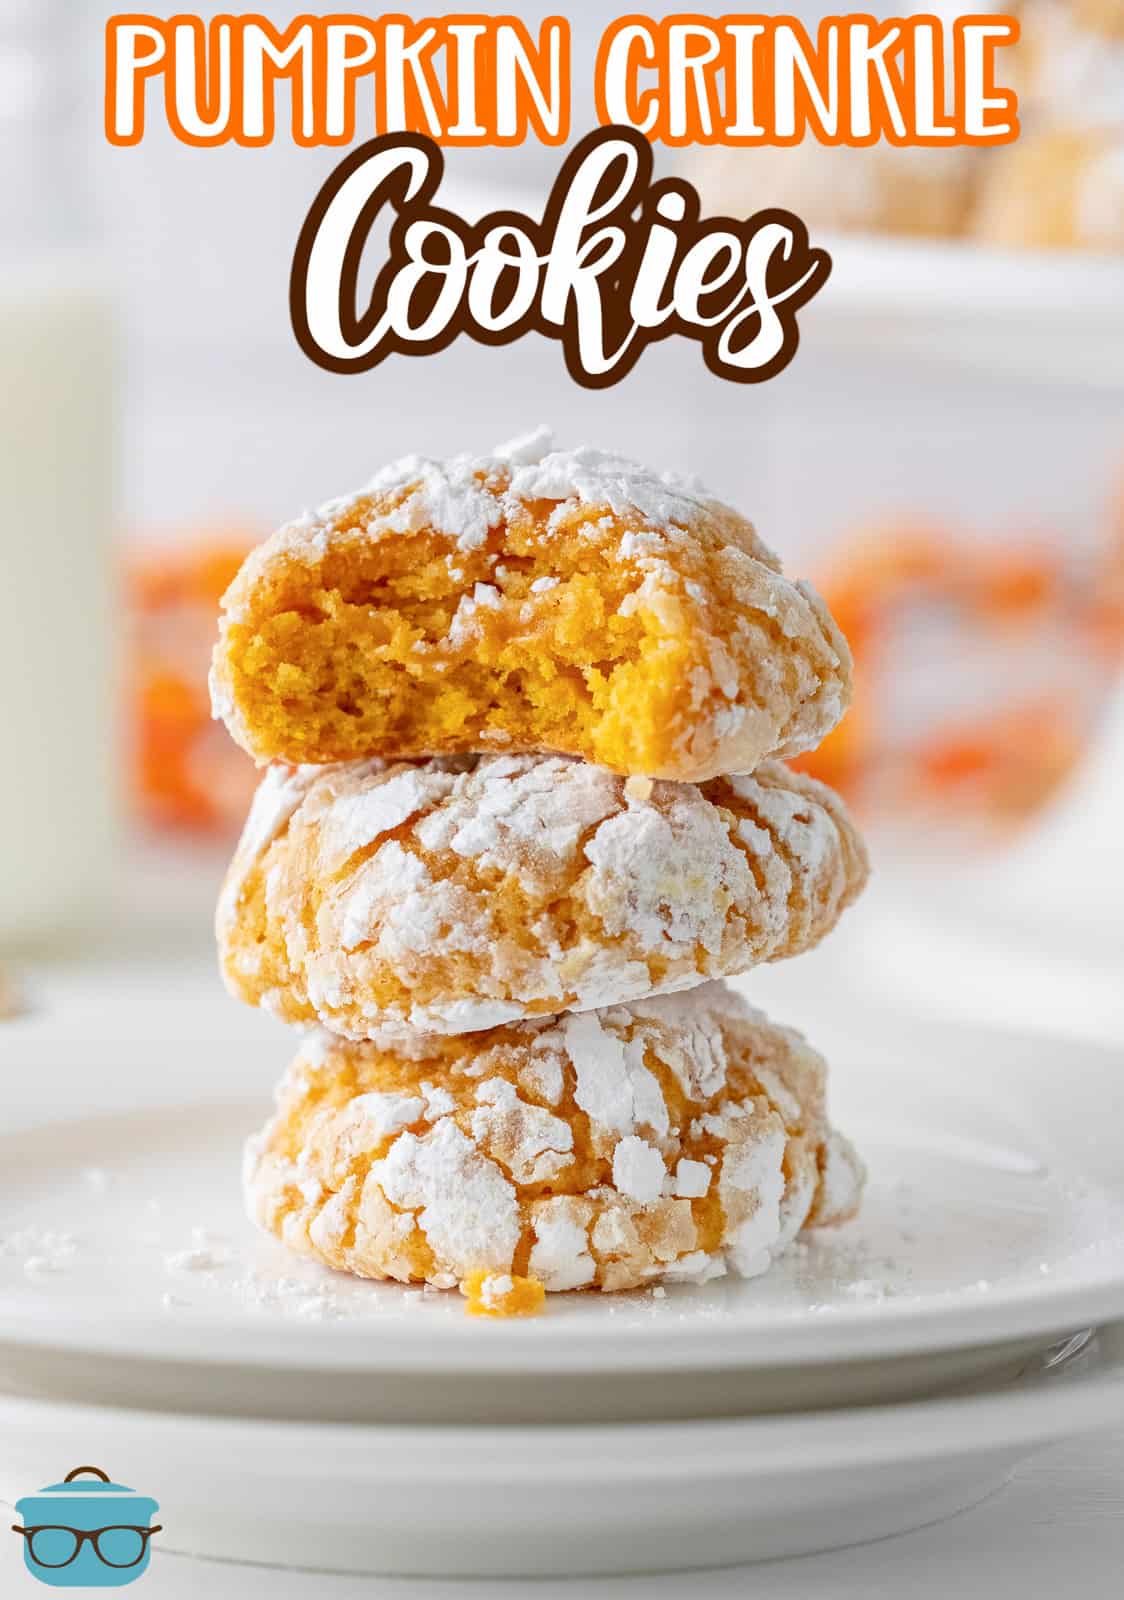 Pinterest image of three stacked Pumpkin Crinkle Cookies with bite taken out of top cookie.